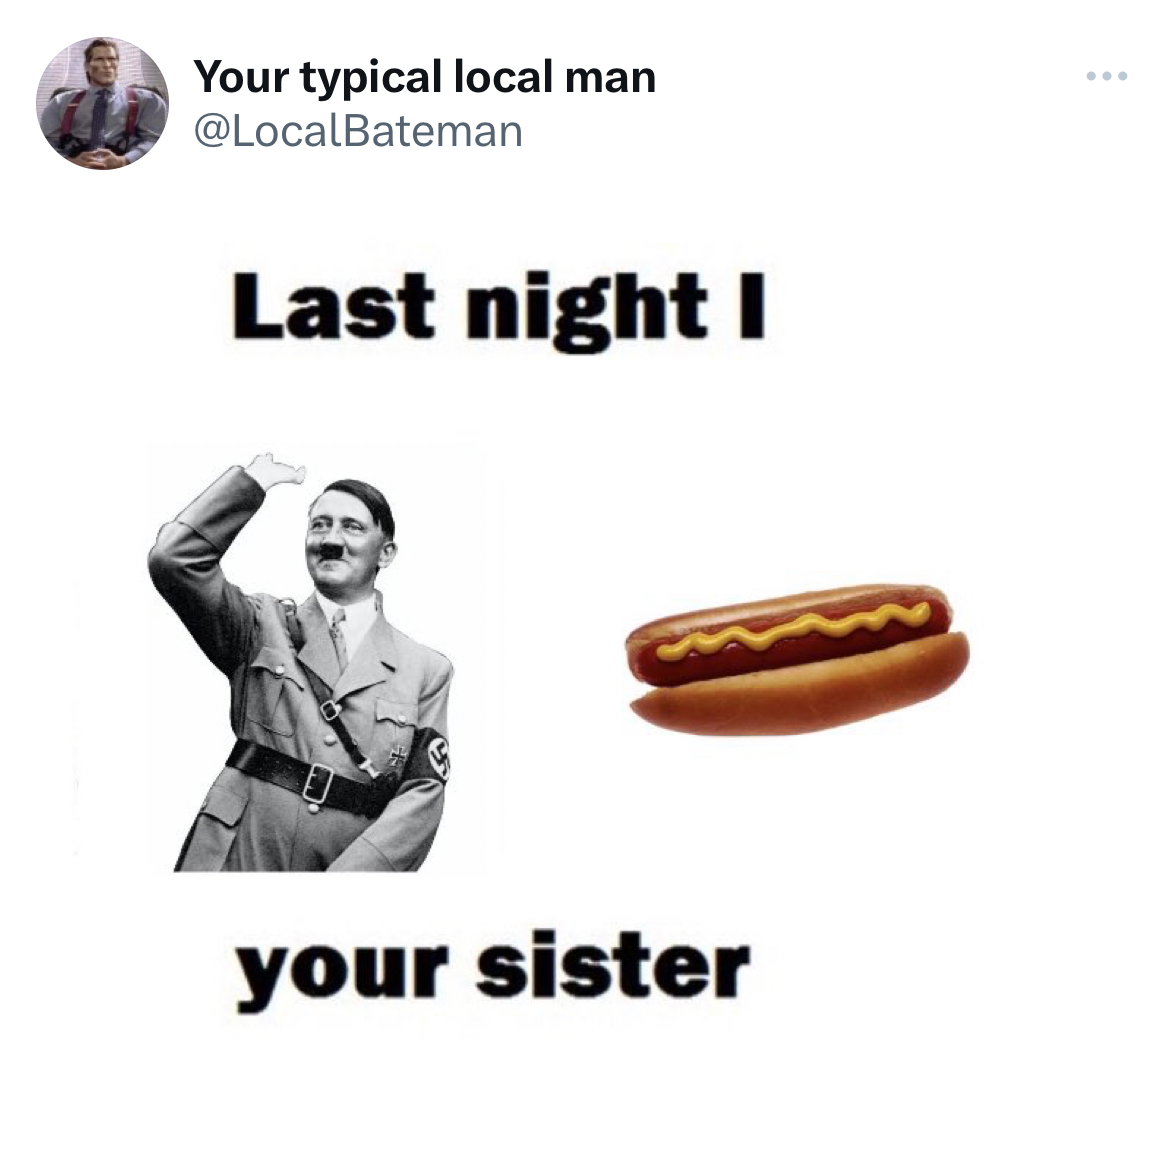 Savage and Unhinged tweets hot dog - Your typical local man Last night I your sister ...